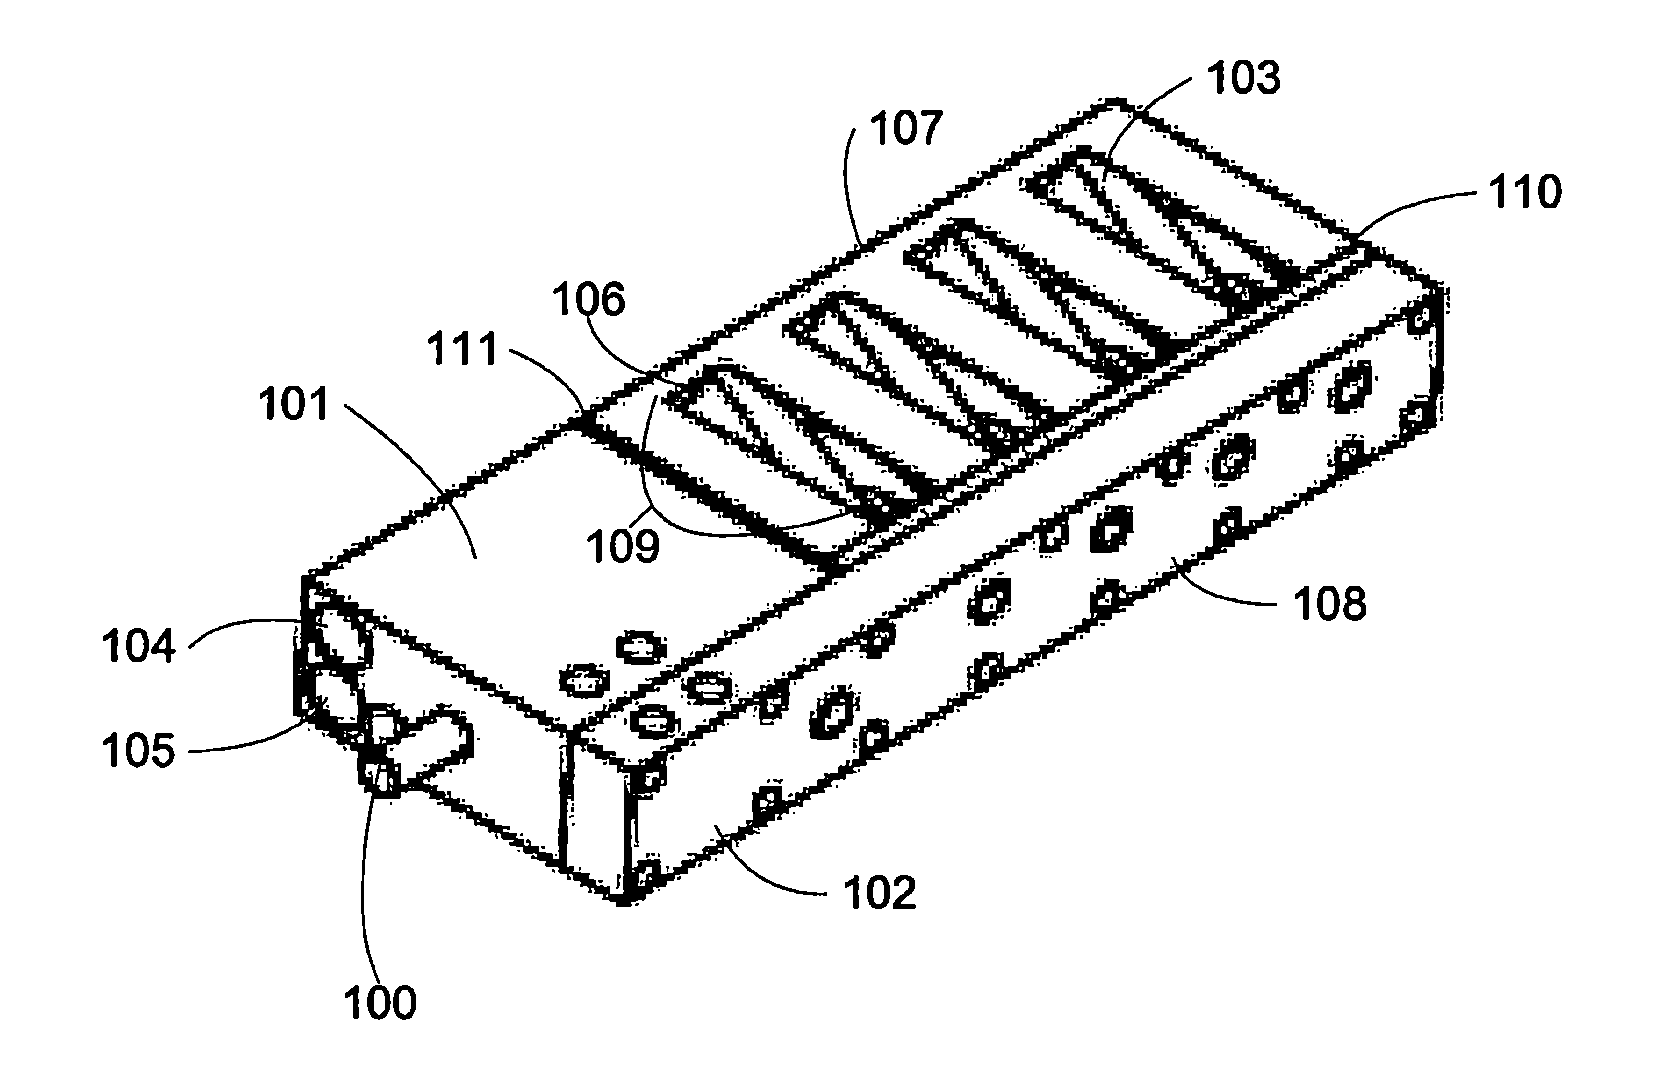 Apparatus and Method for Sculpting the Surface of a Joint